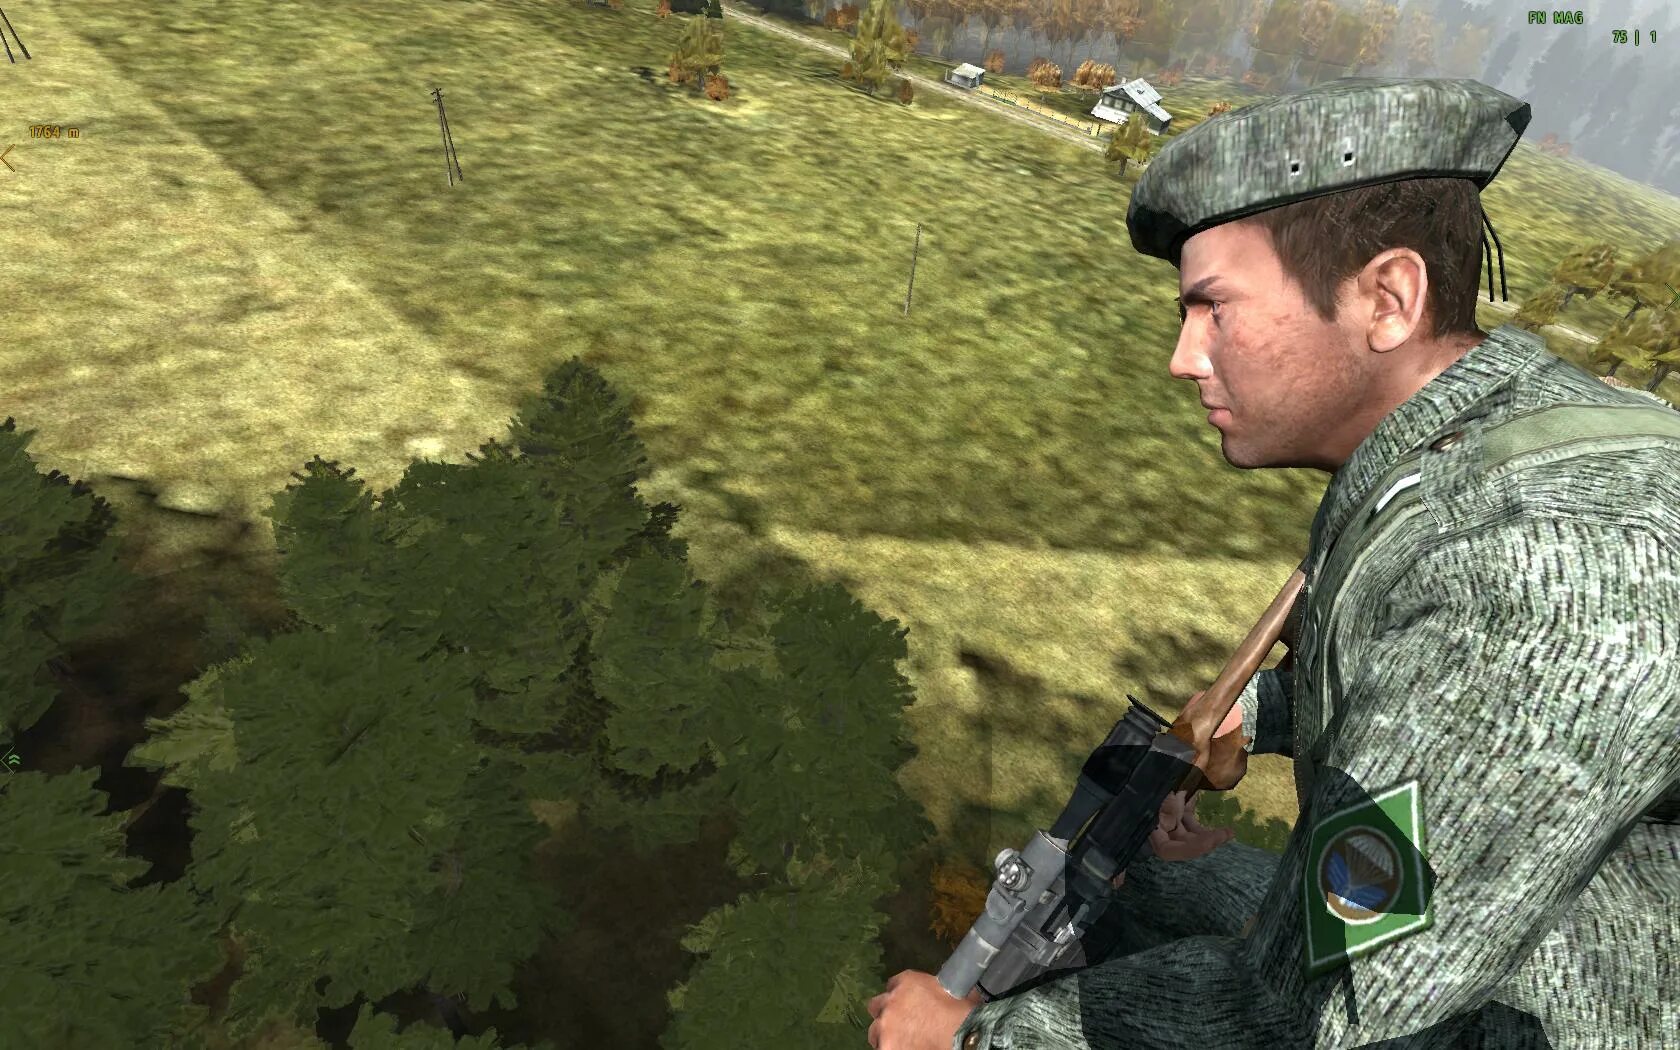 Combined operation. Arma 2 combined Operations. Арма 2 АЕК. Arma 2 combined Operations Vietnam. Patrol ops Arma 2.